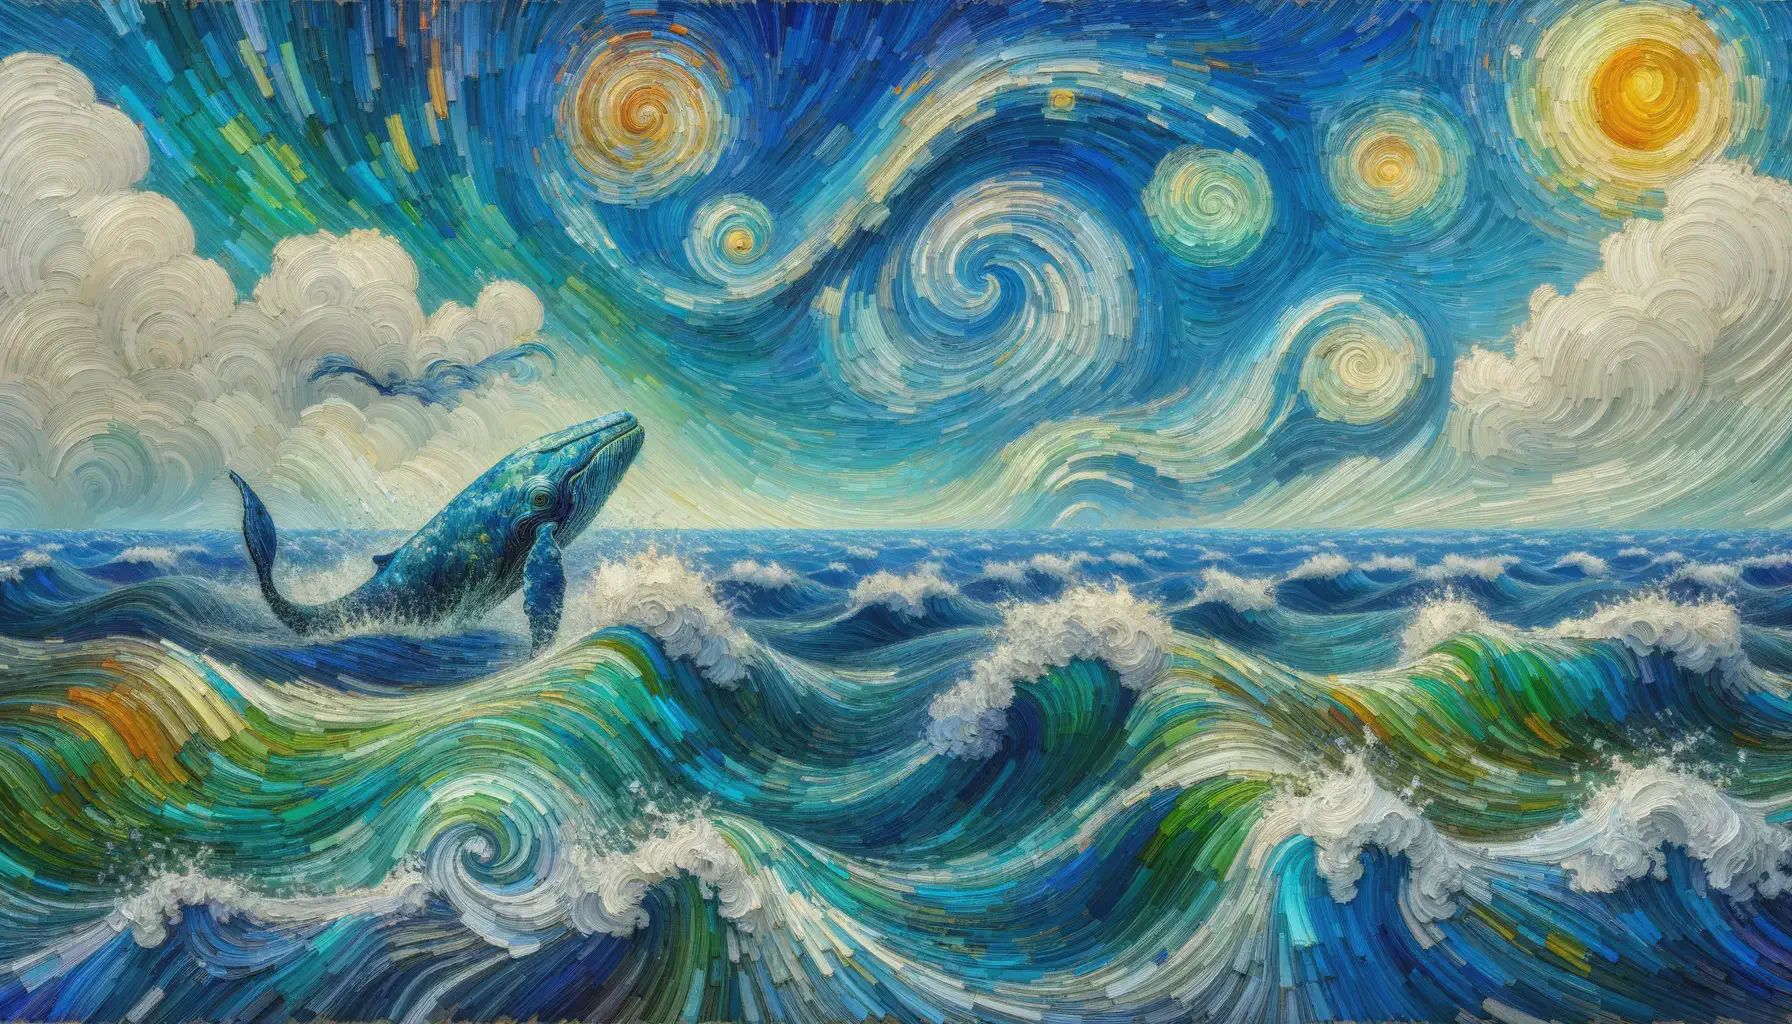 A whale leaping out of the ocean in the style of Vincent van Gogh.